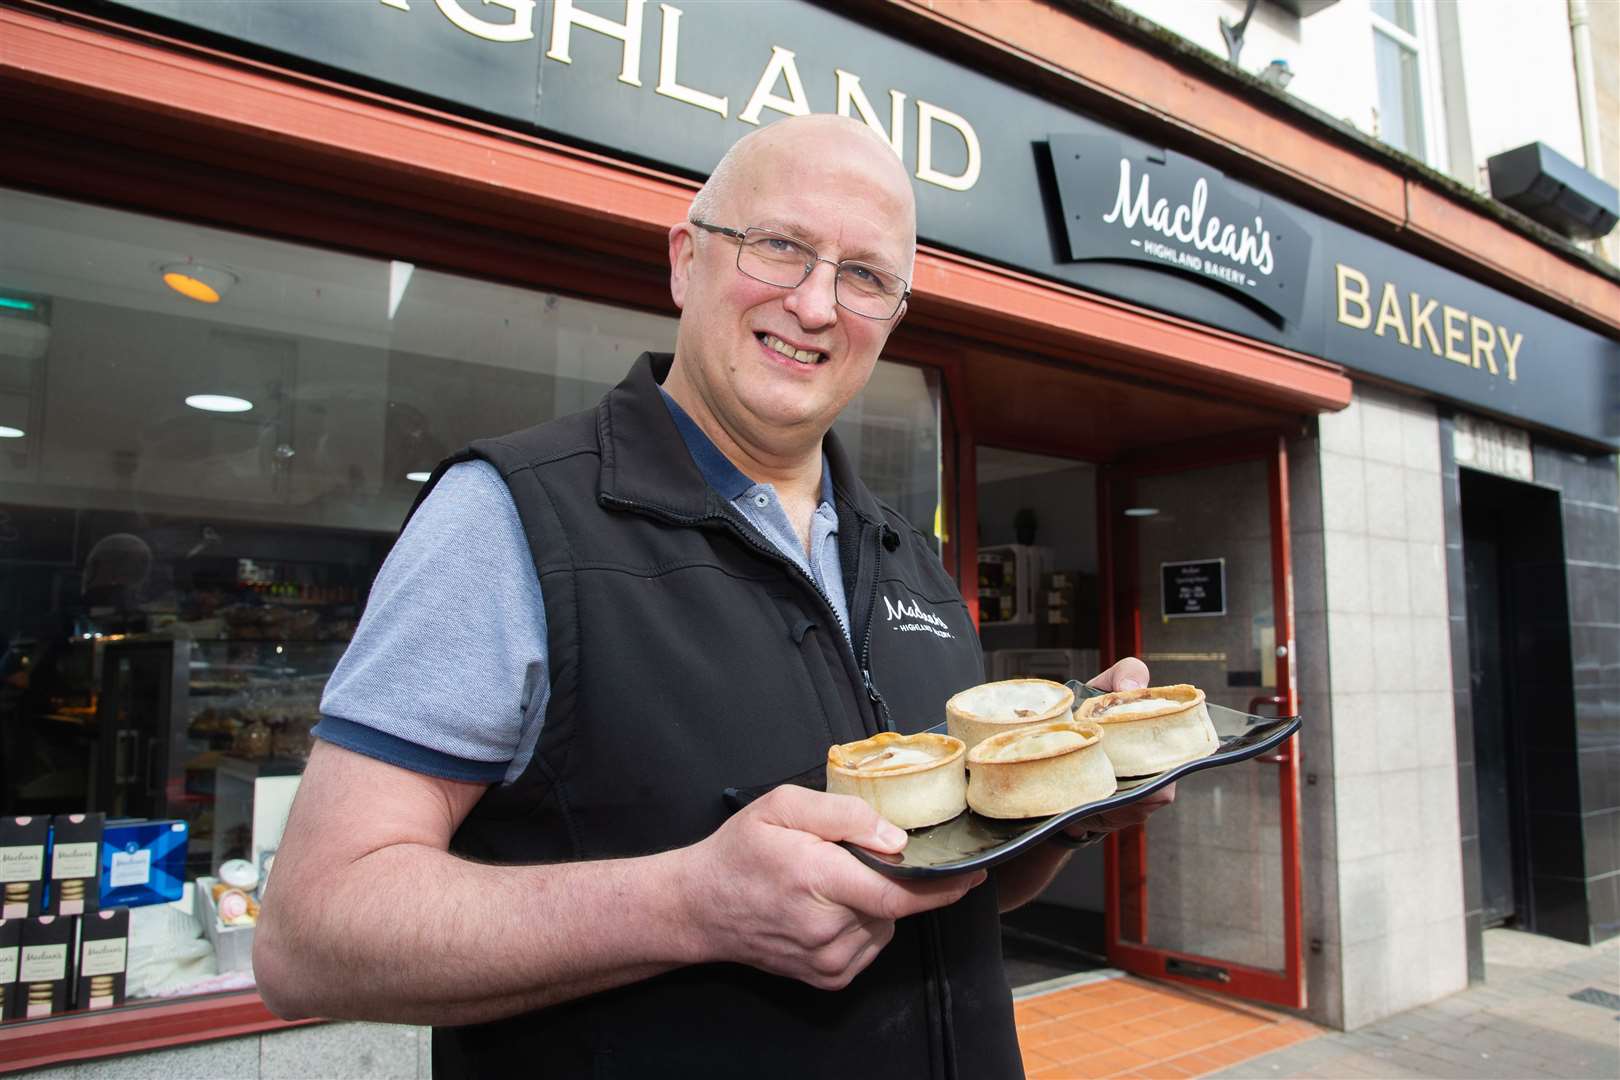 Lewis Maclean (Maclean's Highland Bakery) has been shortlisted for Scotch Pie of the Year.